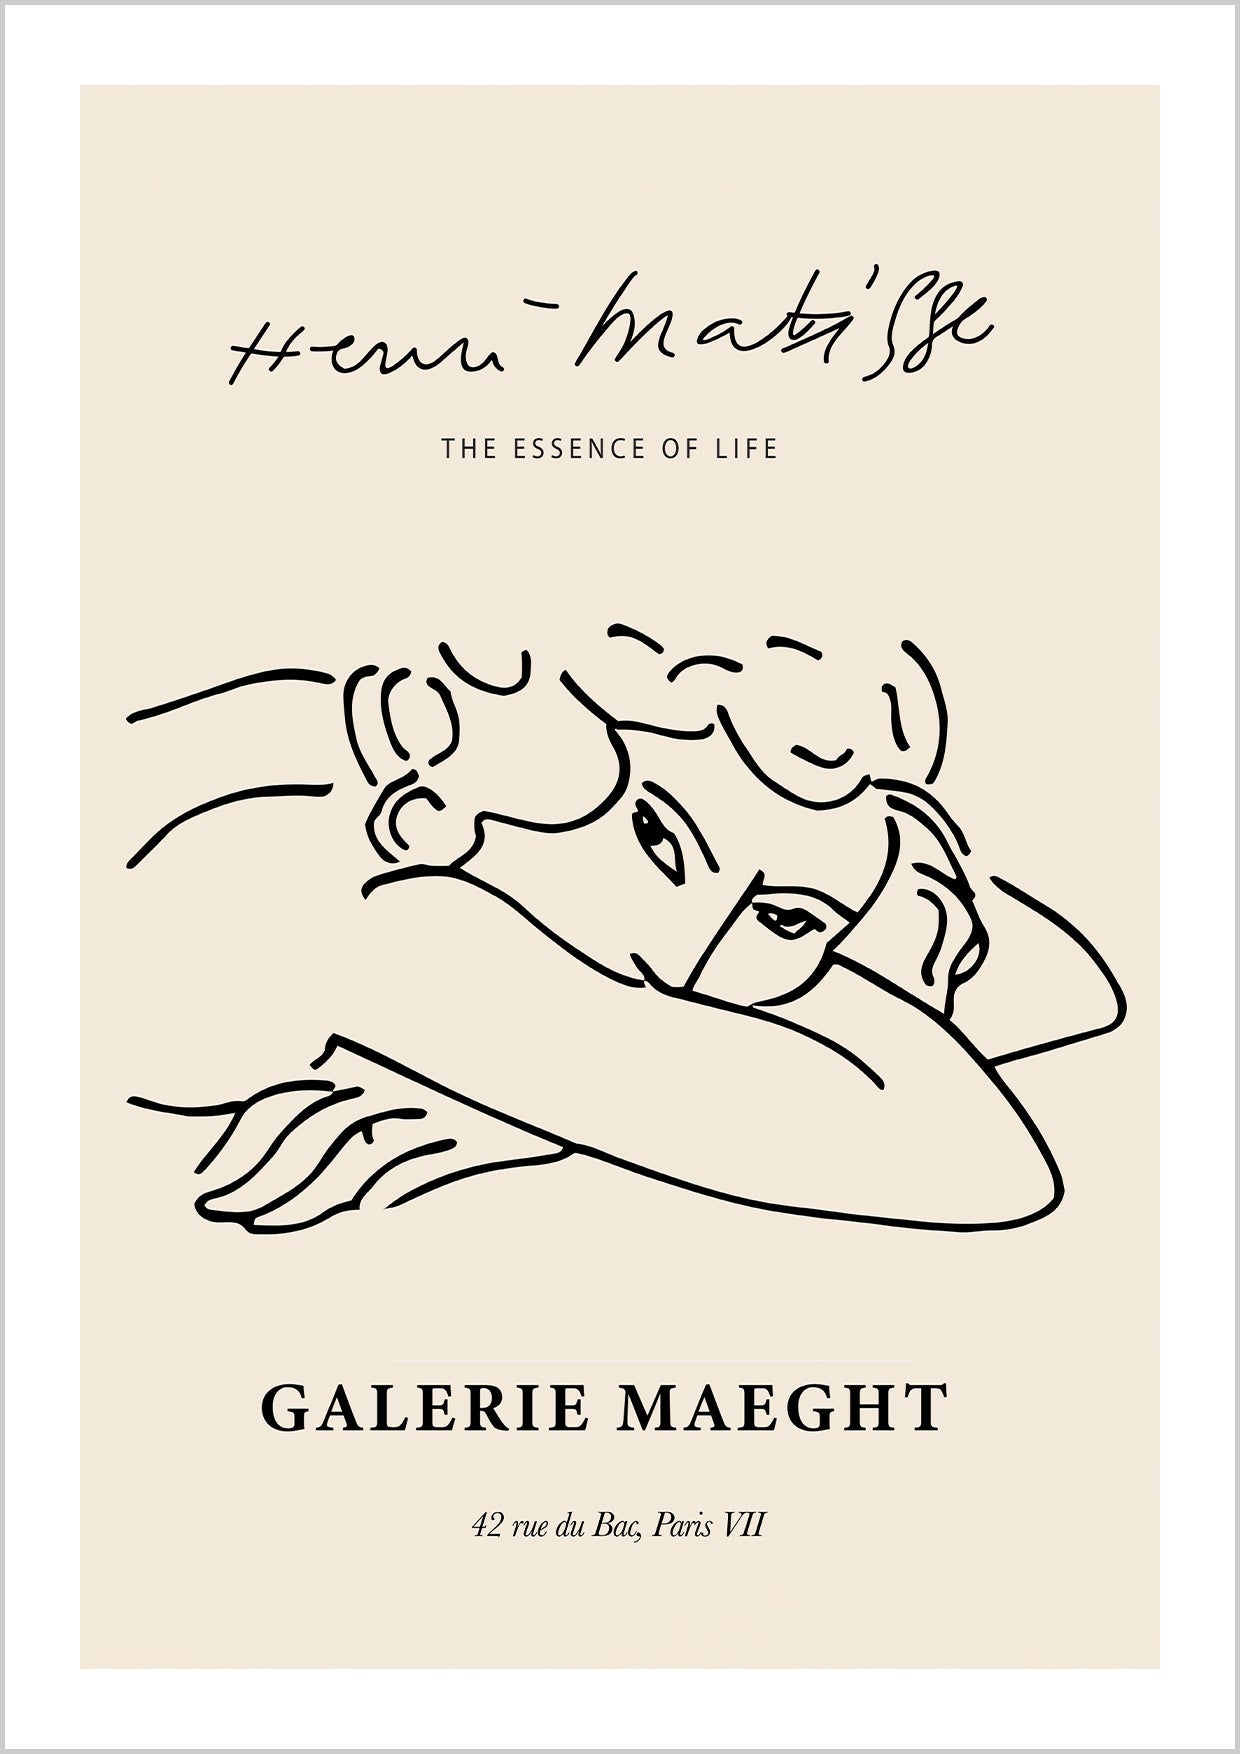 Henri Matisse’s inspired, simple line art of a resting woman on a beige background